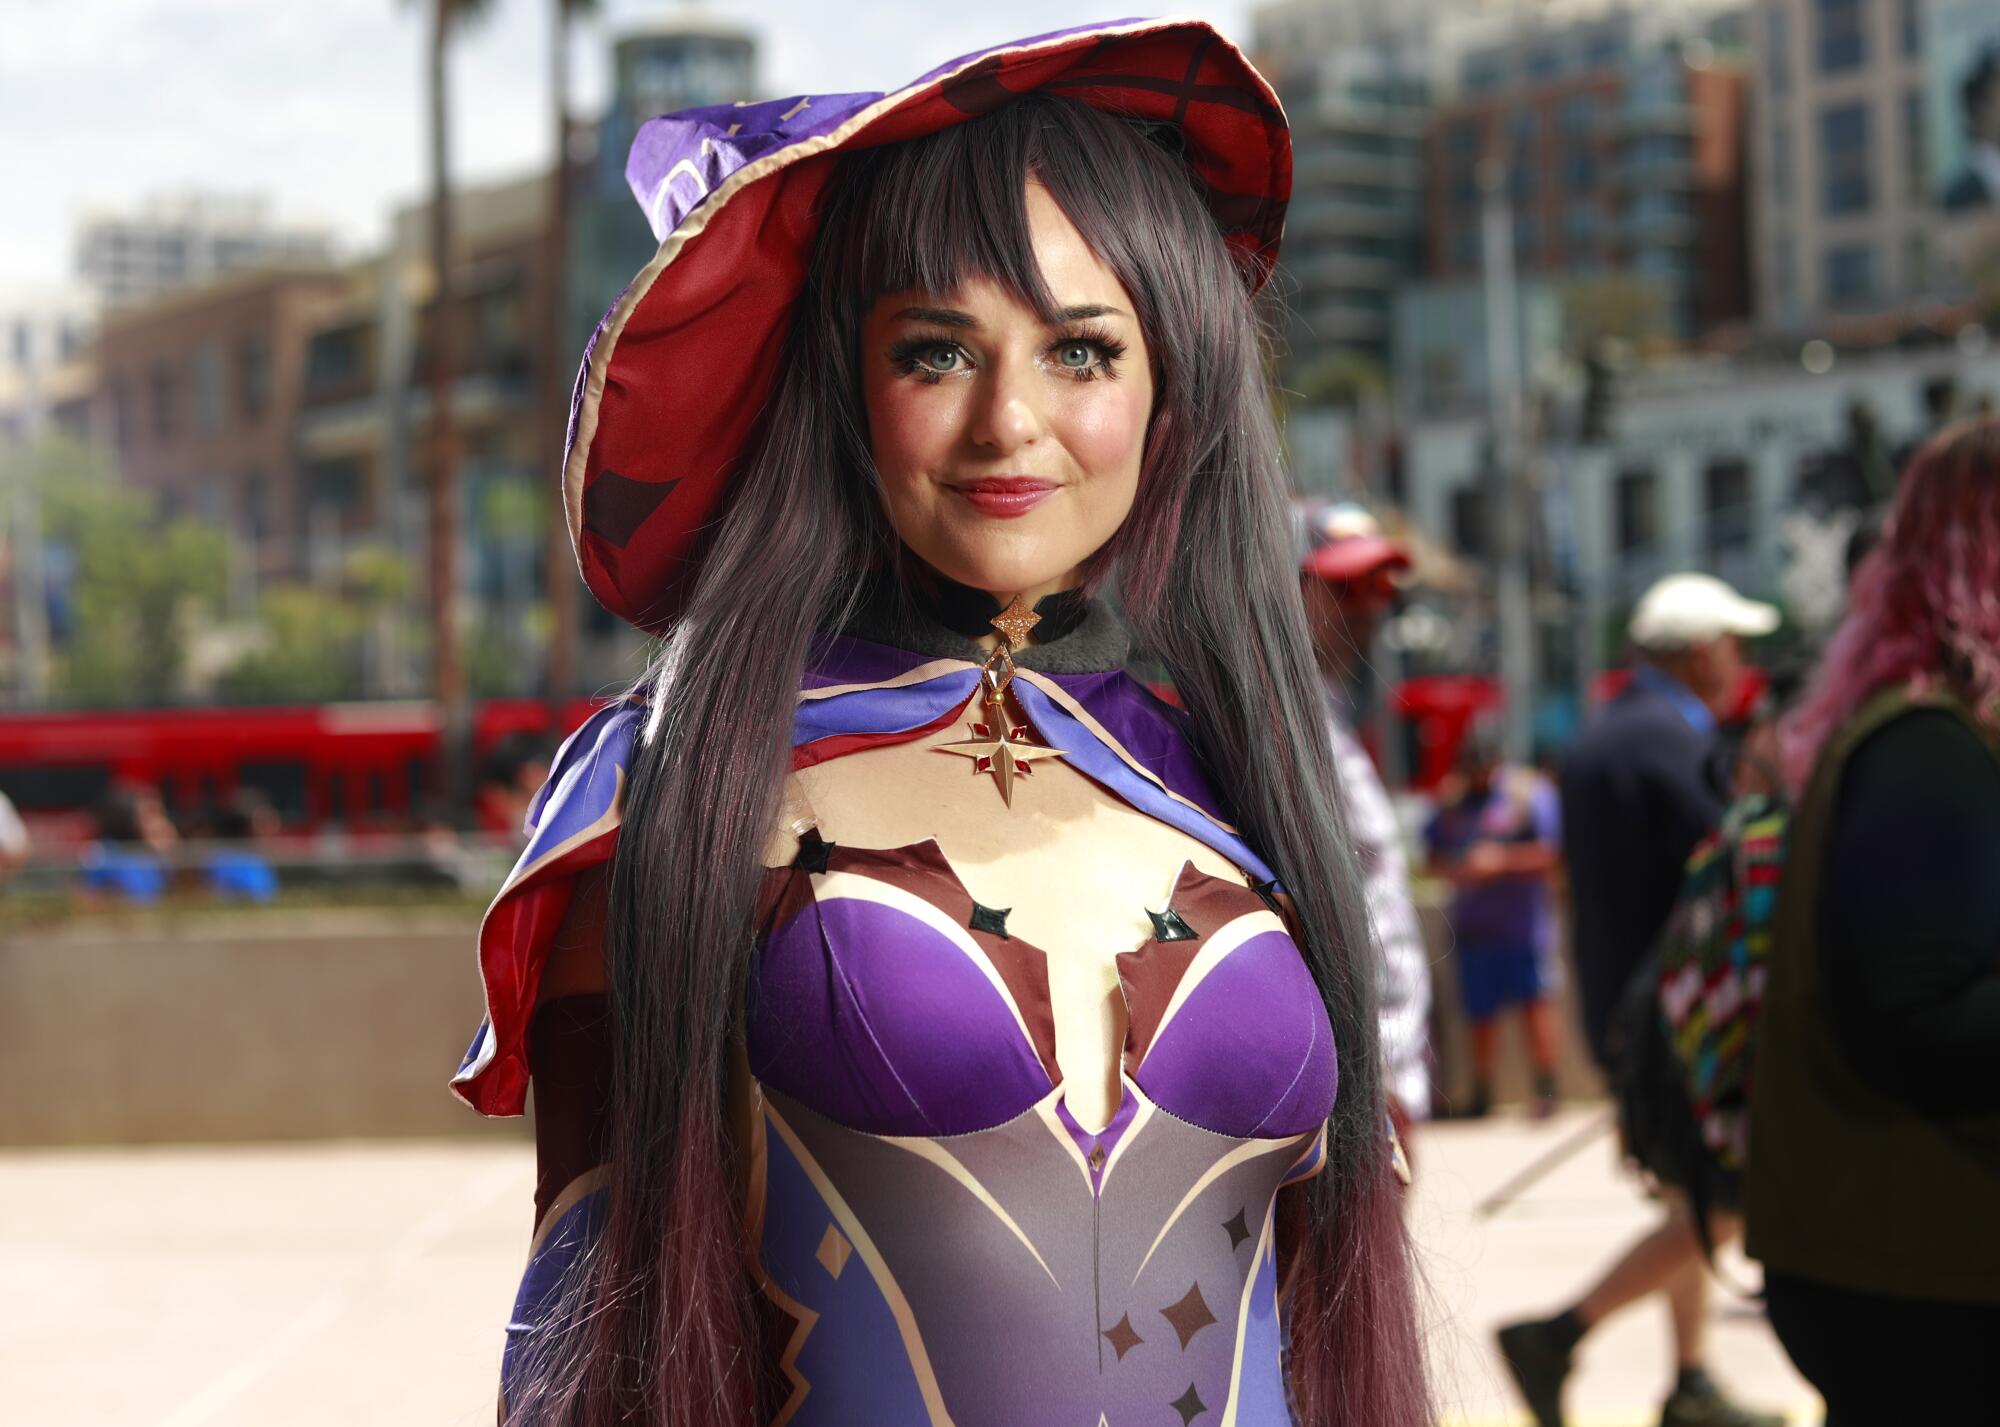 Tanya Lehoux of Los Angeles dressed as Mona from Genshin Impact.